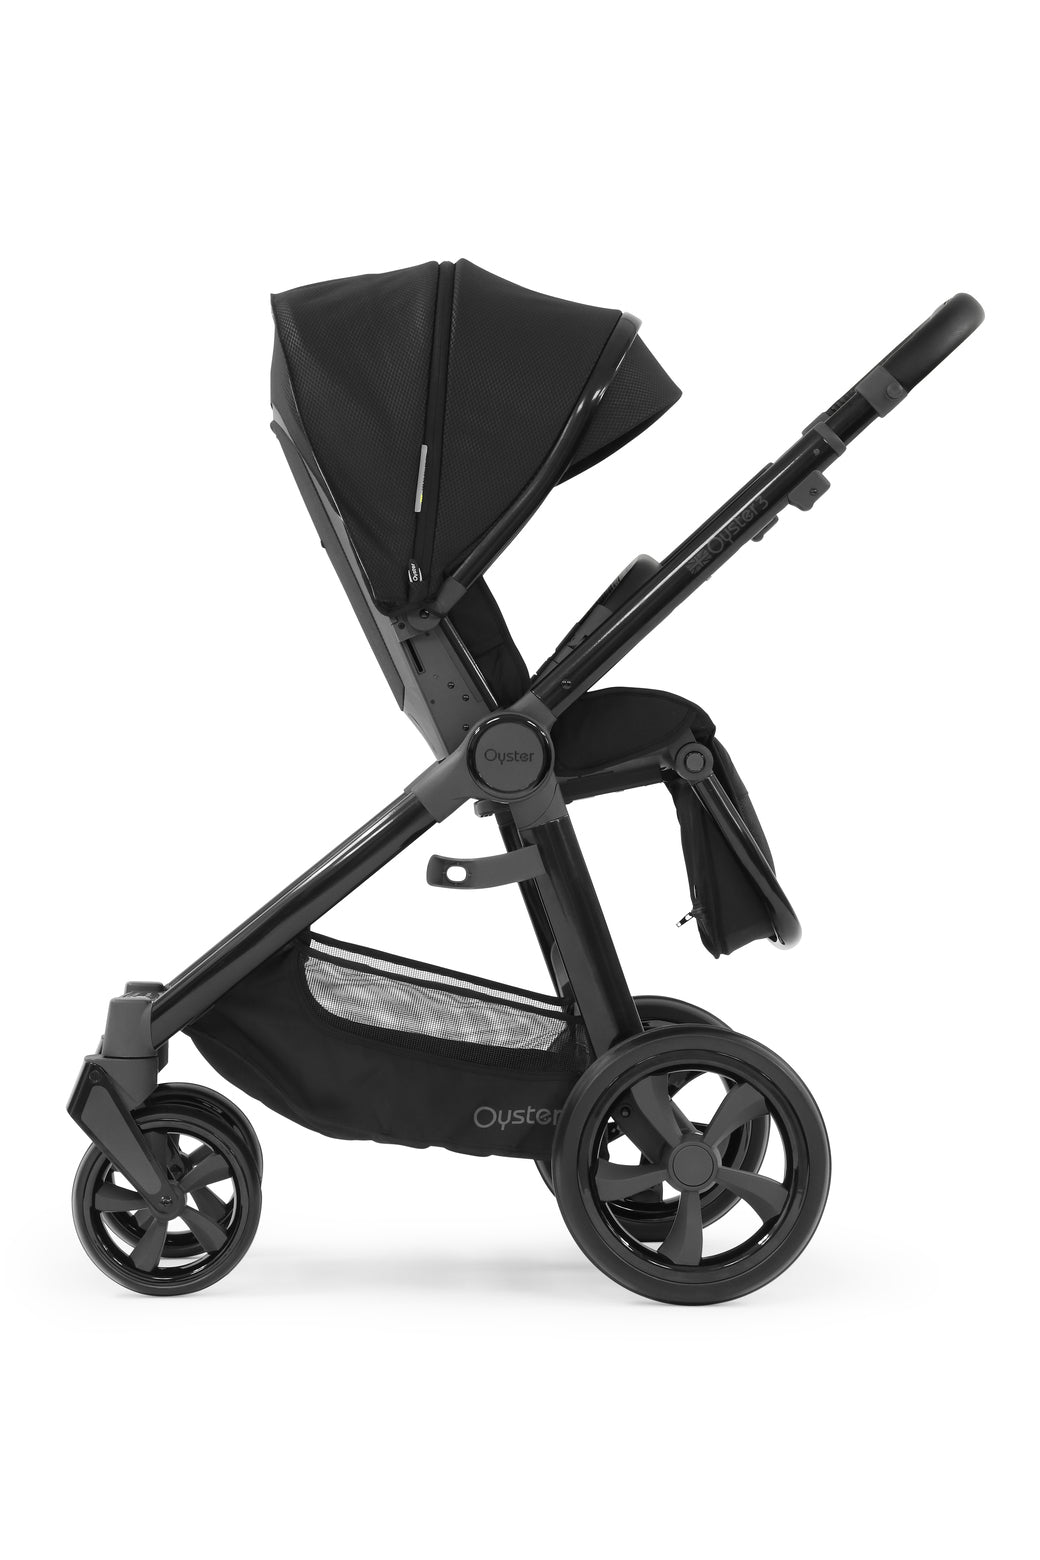 Babystyle Oyster 3 Essential 5 Piece Travel System Bundle With Cloud T - Pixel - For Your Little One